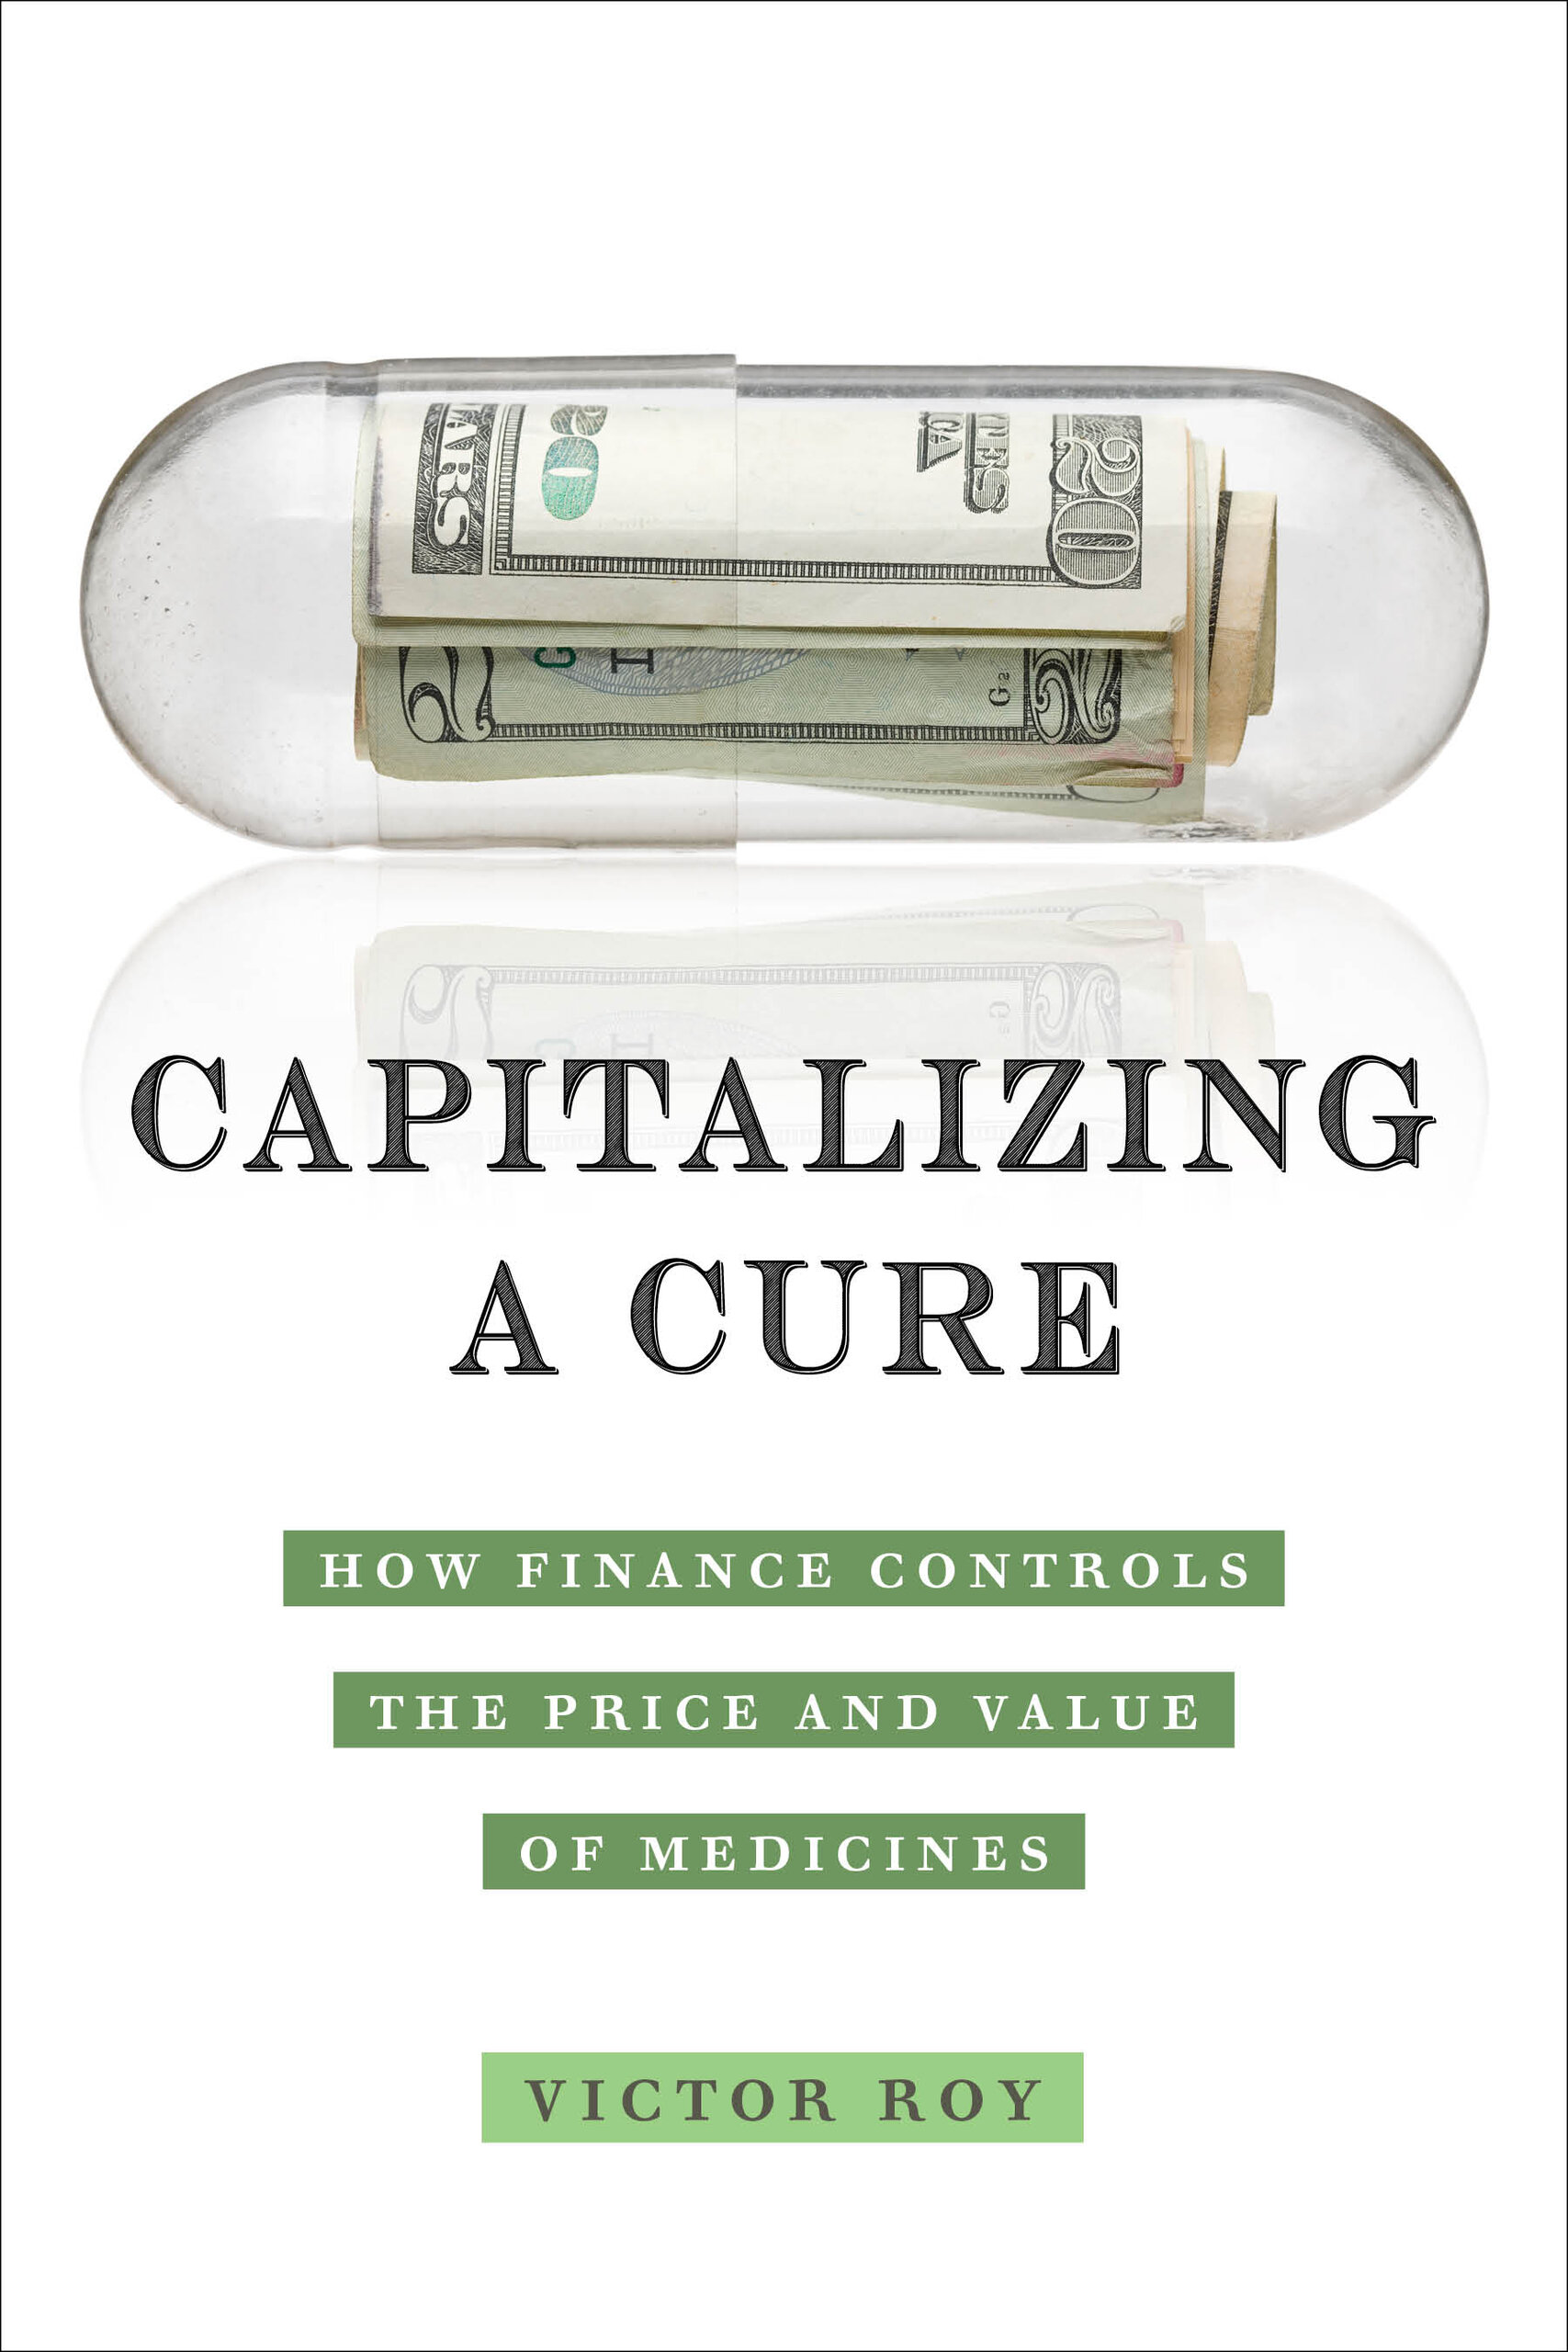 Capitalizing a Cure by Victor Roy